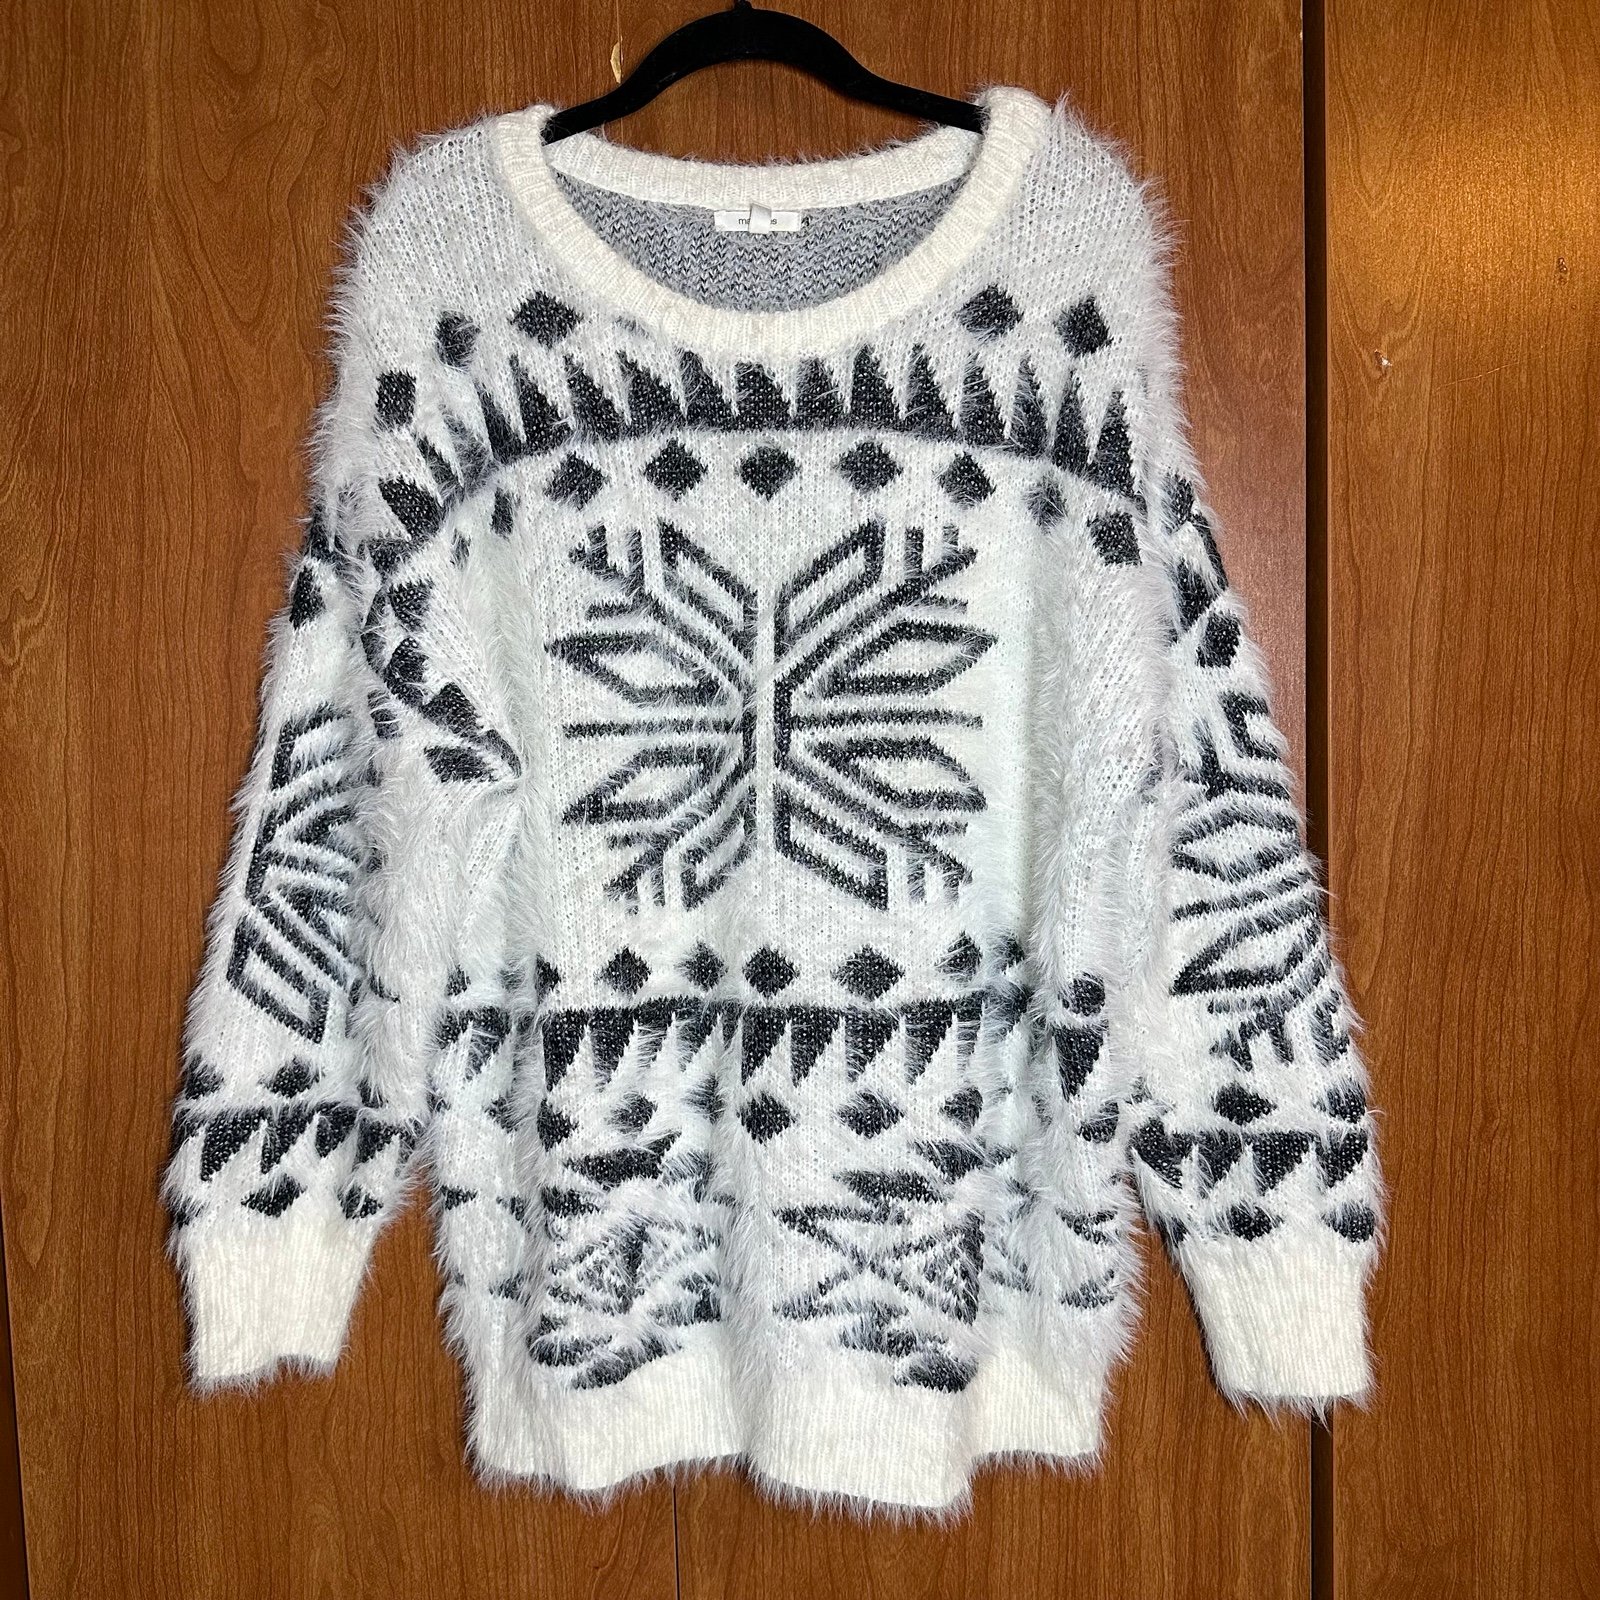 Great Maurices Patterned Fuzzy Sweater Knit Aztec Snowf